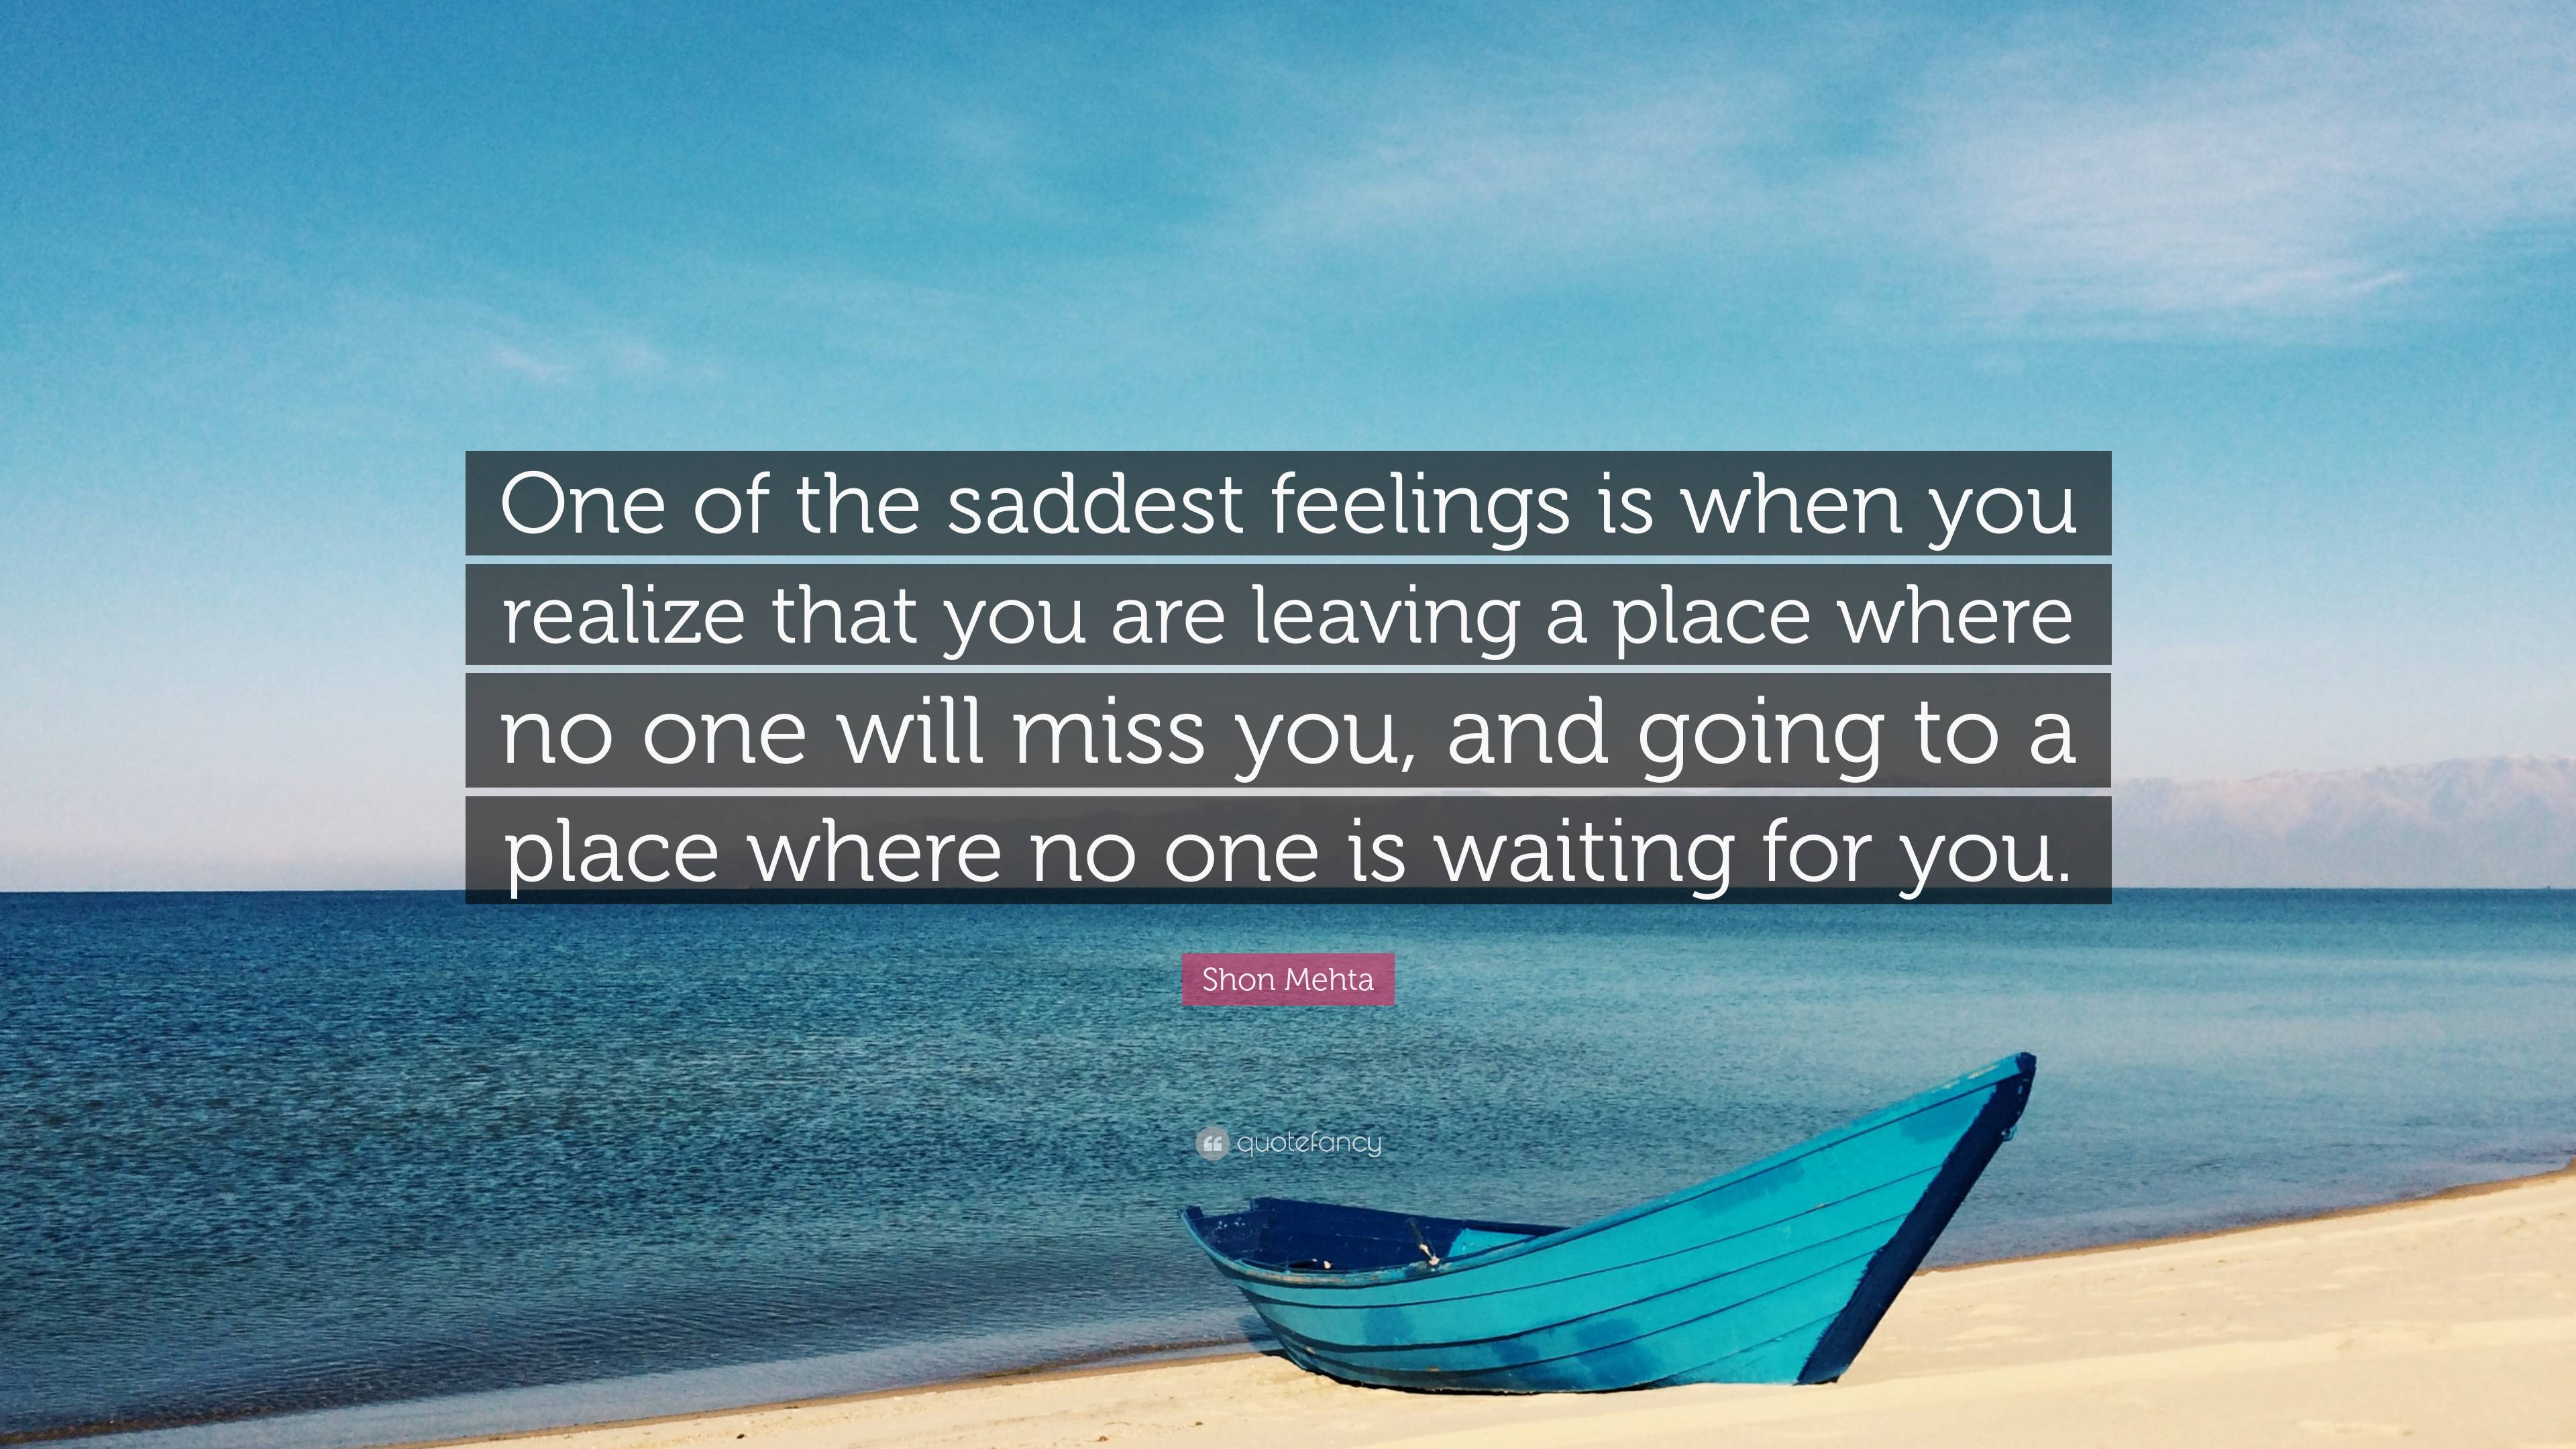 Shon Mehta Quote: “One of the saddest feelings is when you realize that ...